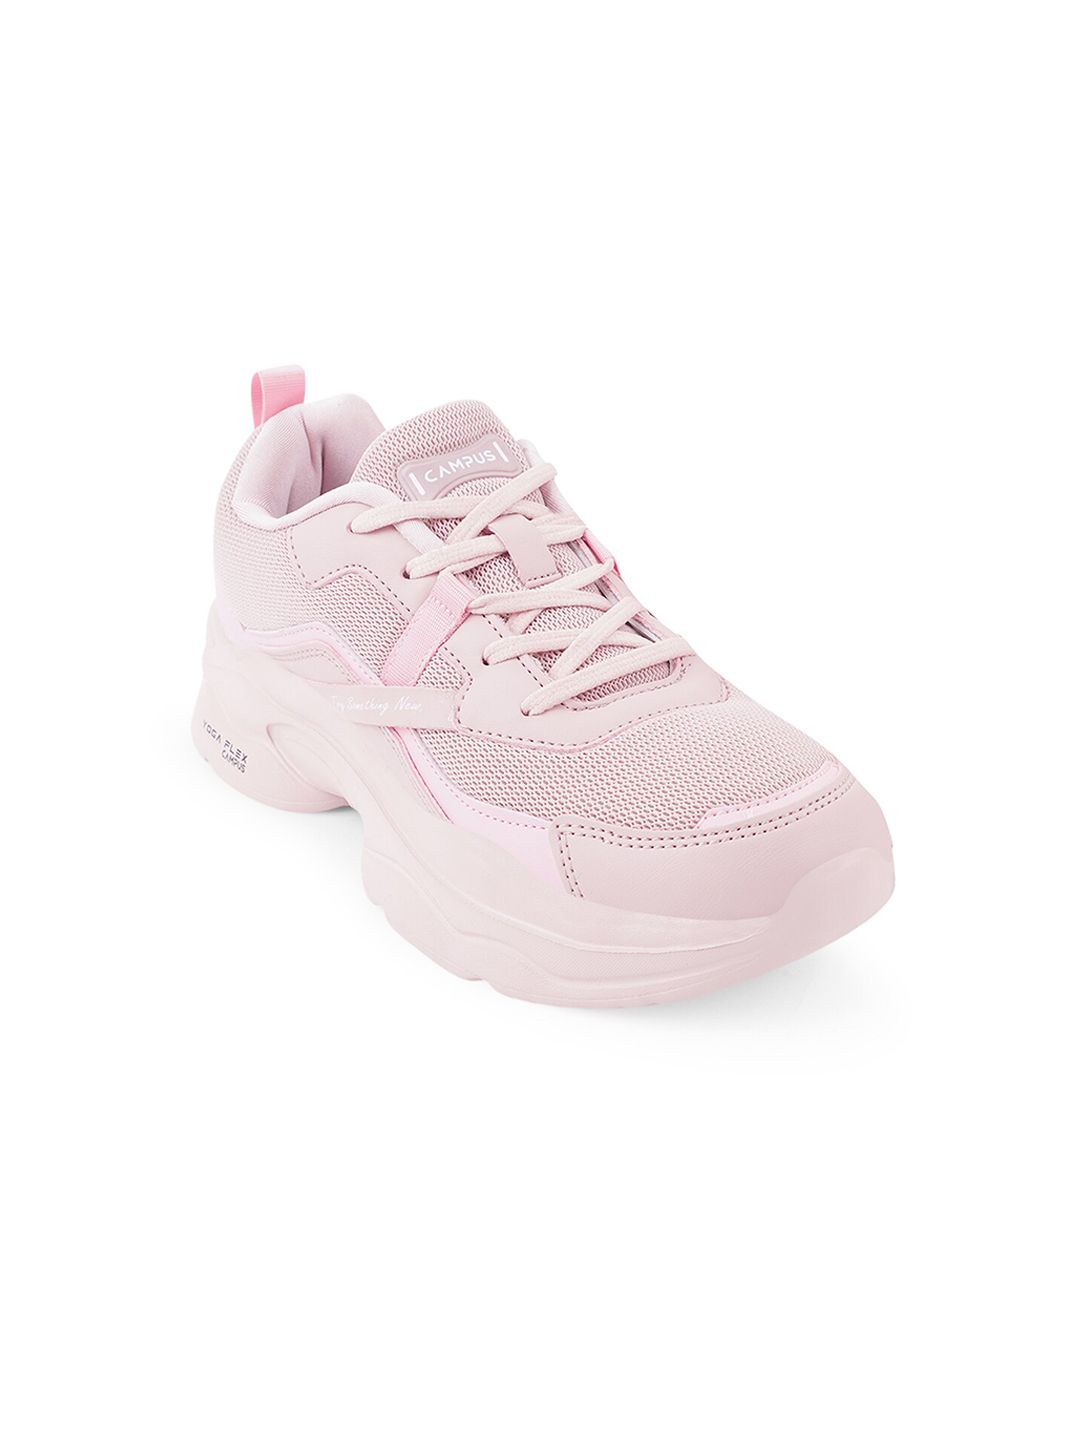 Campus Women Peach-Coloured Mesh Running Shoes Price in India